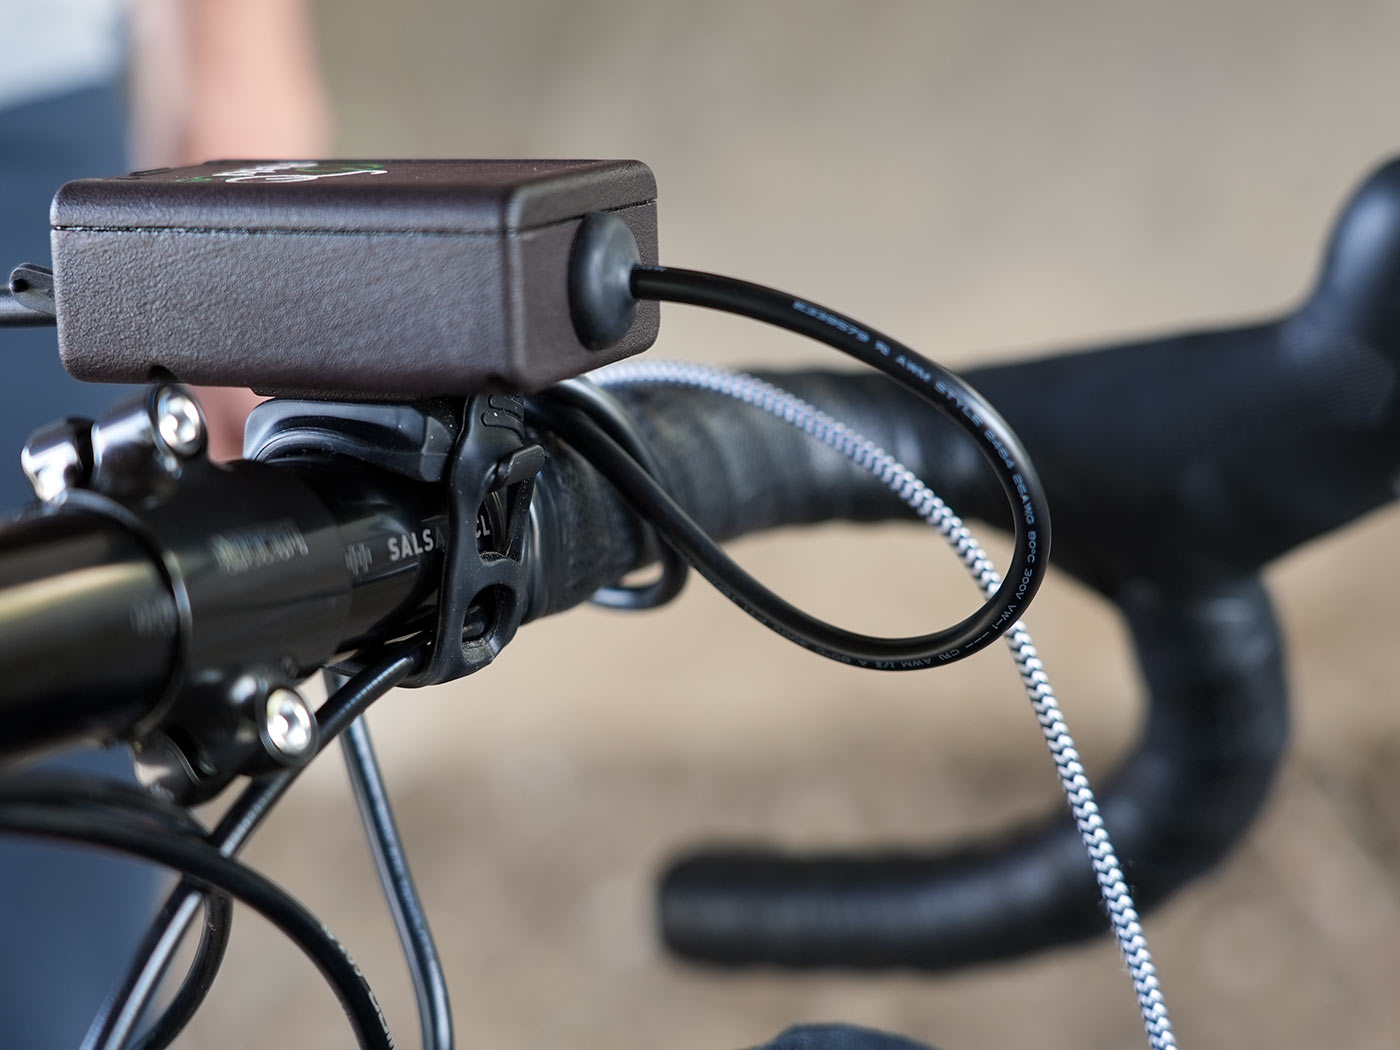 pedalcell bicycle dynamo control box with USB outlets shown on a handlebar